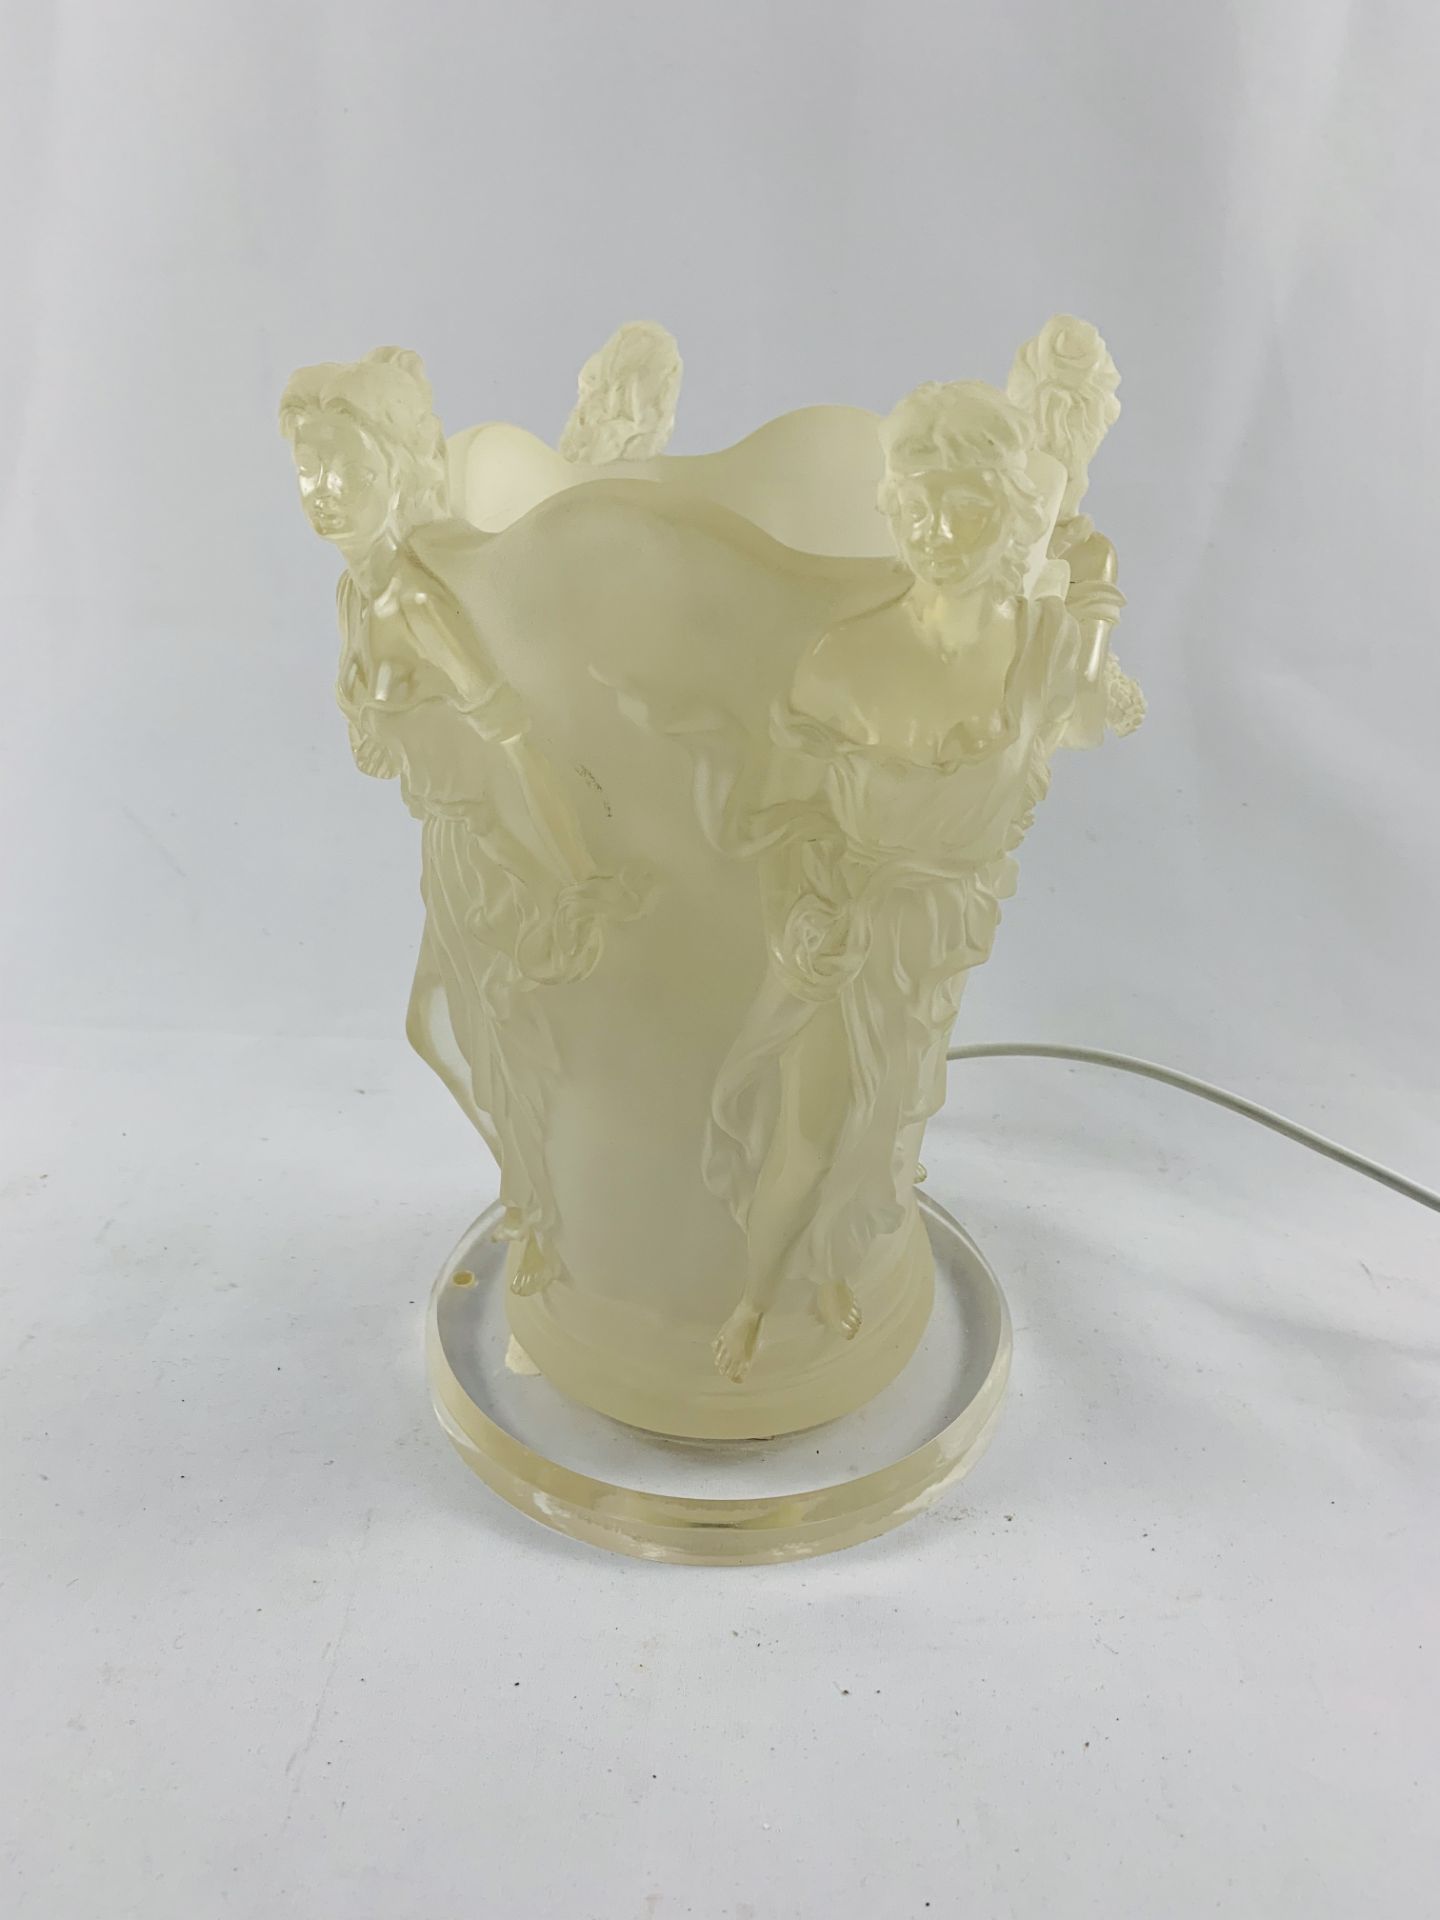 Tall ‘Lalique’ frosted style, four semi clad maidens table lamp on clear base by Widdop Bingham & Co - Image 2 of 2